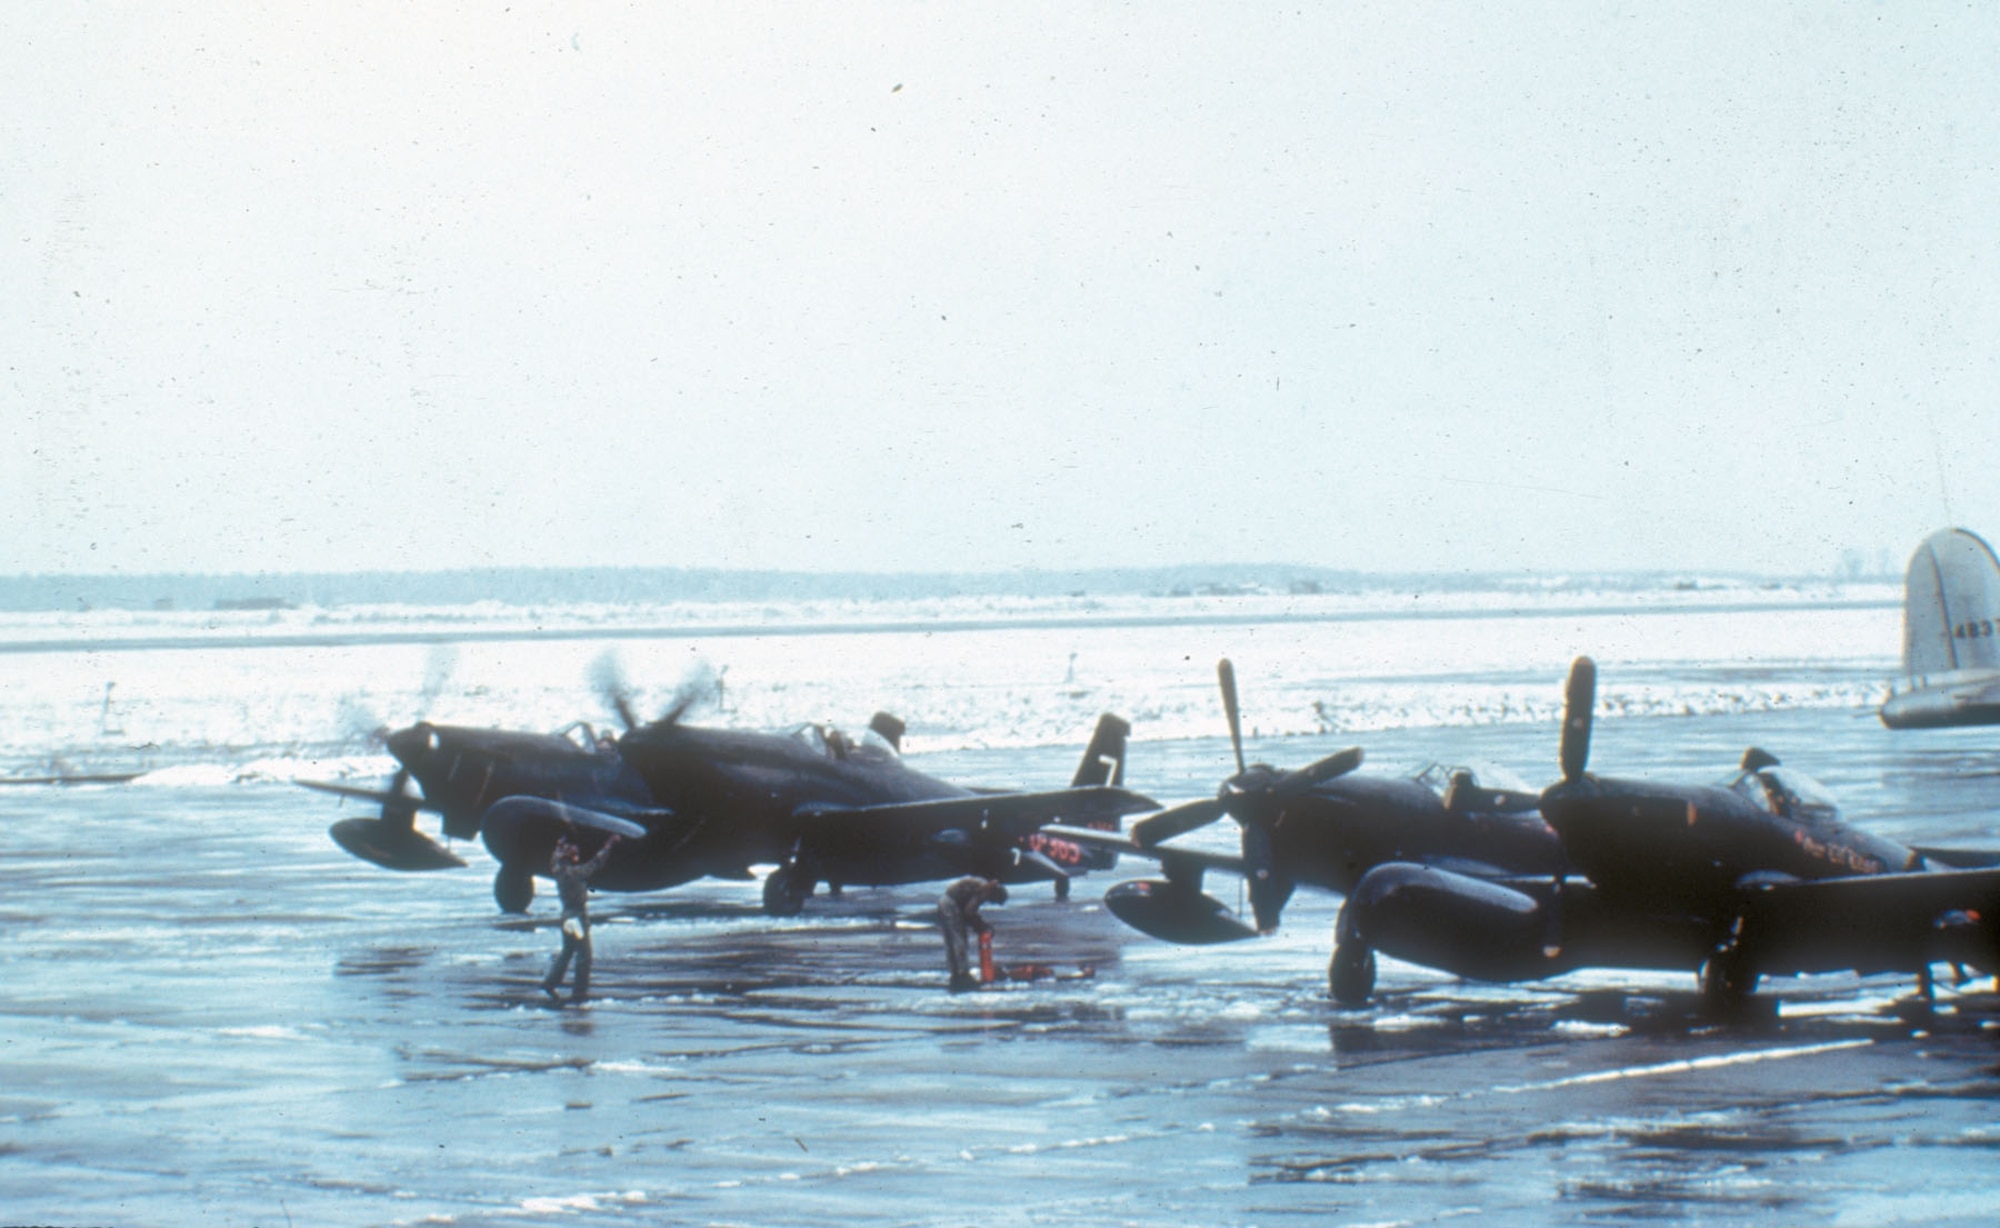 All-weather F-82G fighters at an air base in Japan. The USAF was forced to base some of its fighter units in Japan when communist forces overran South Korean bases in 1950 and 1951. (U.S. Air Force photo)